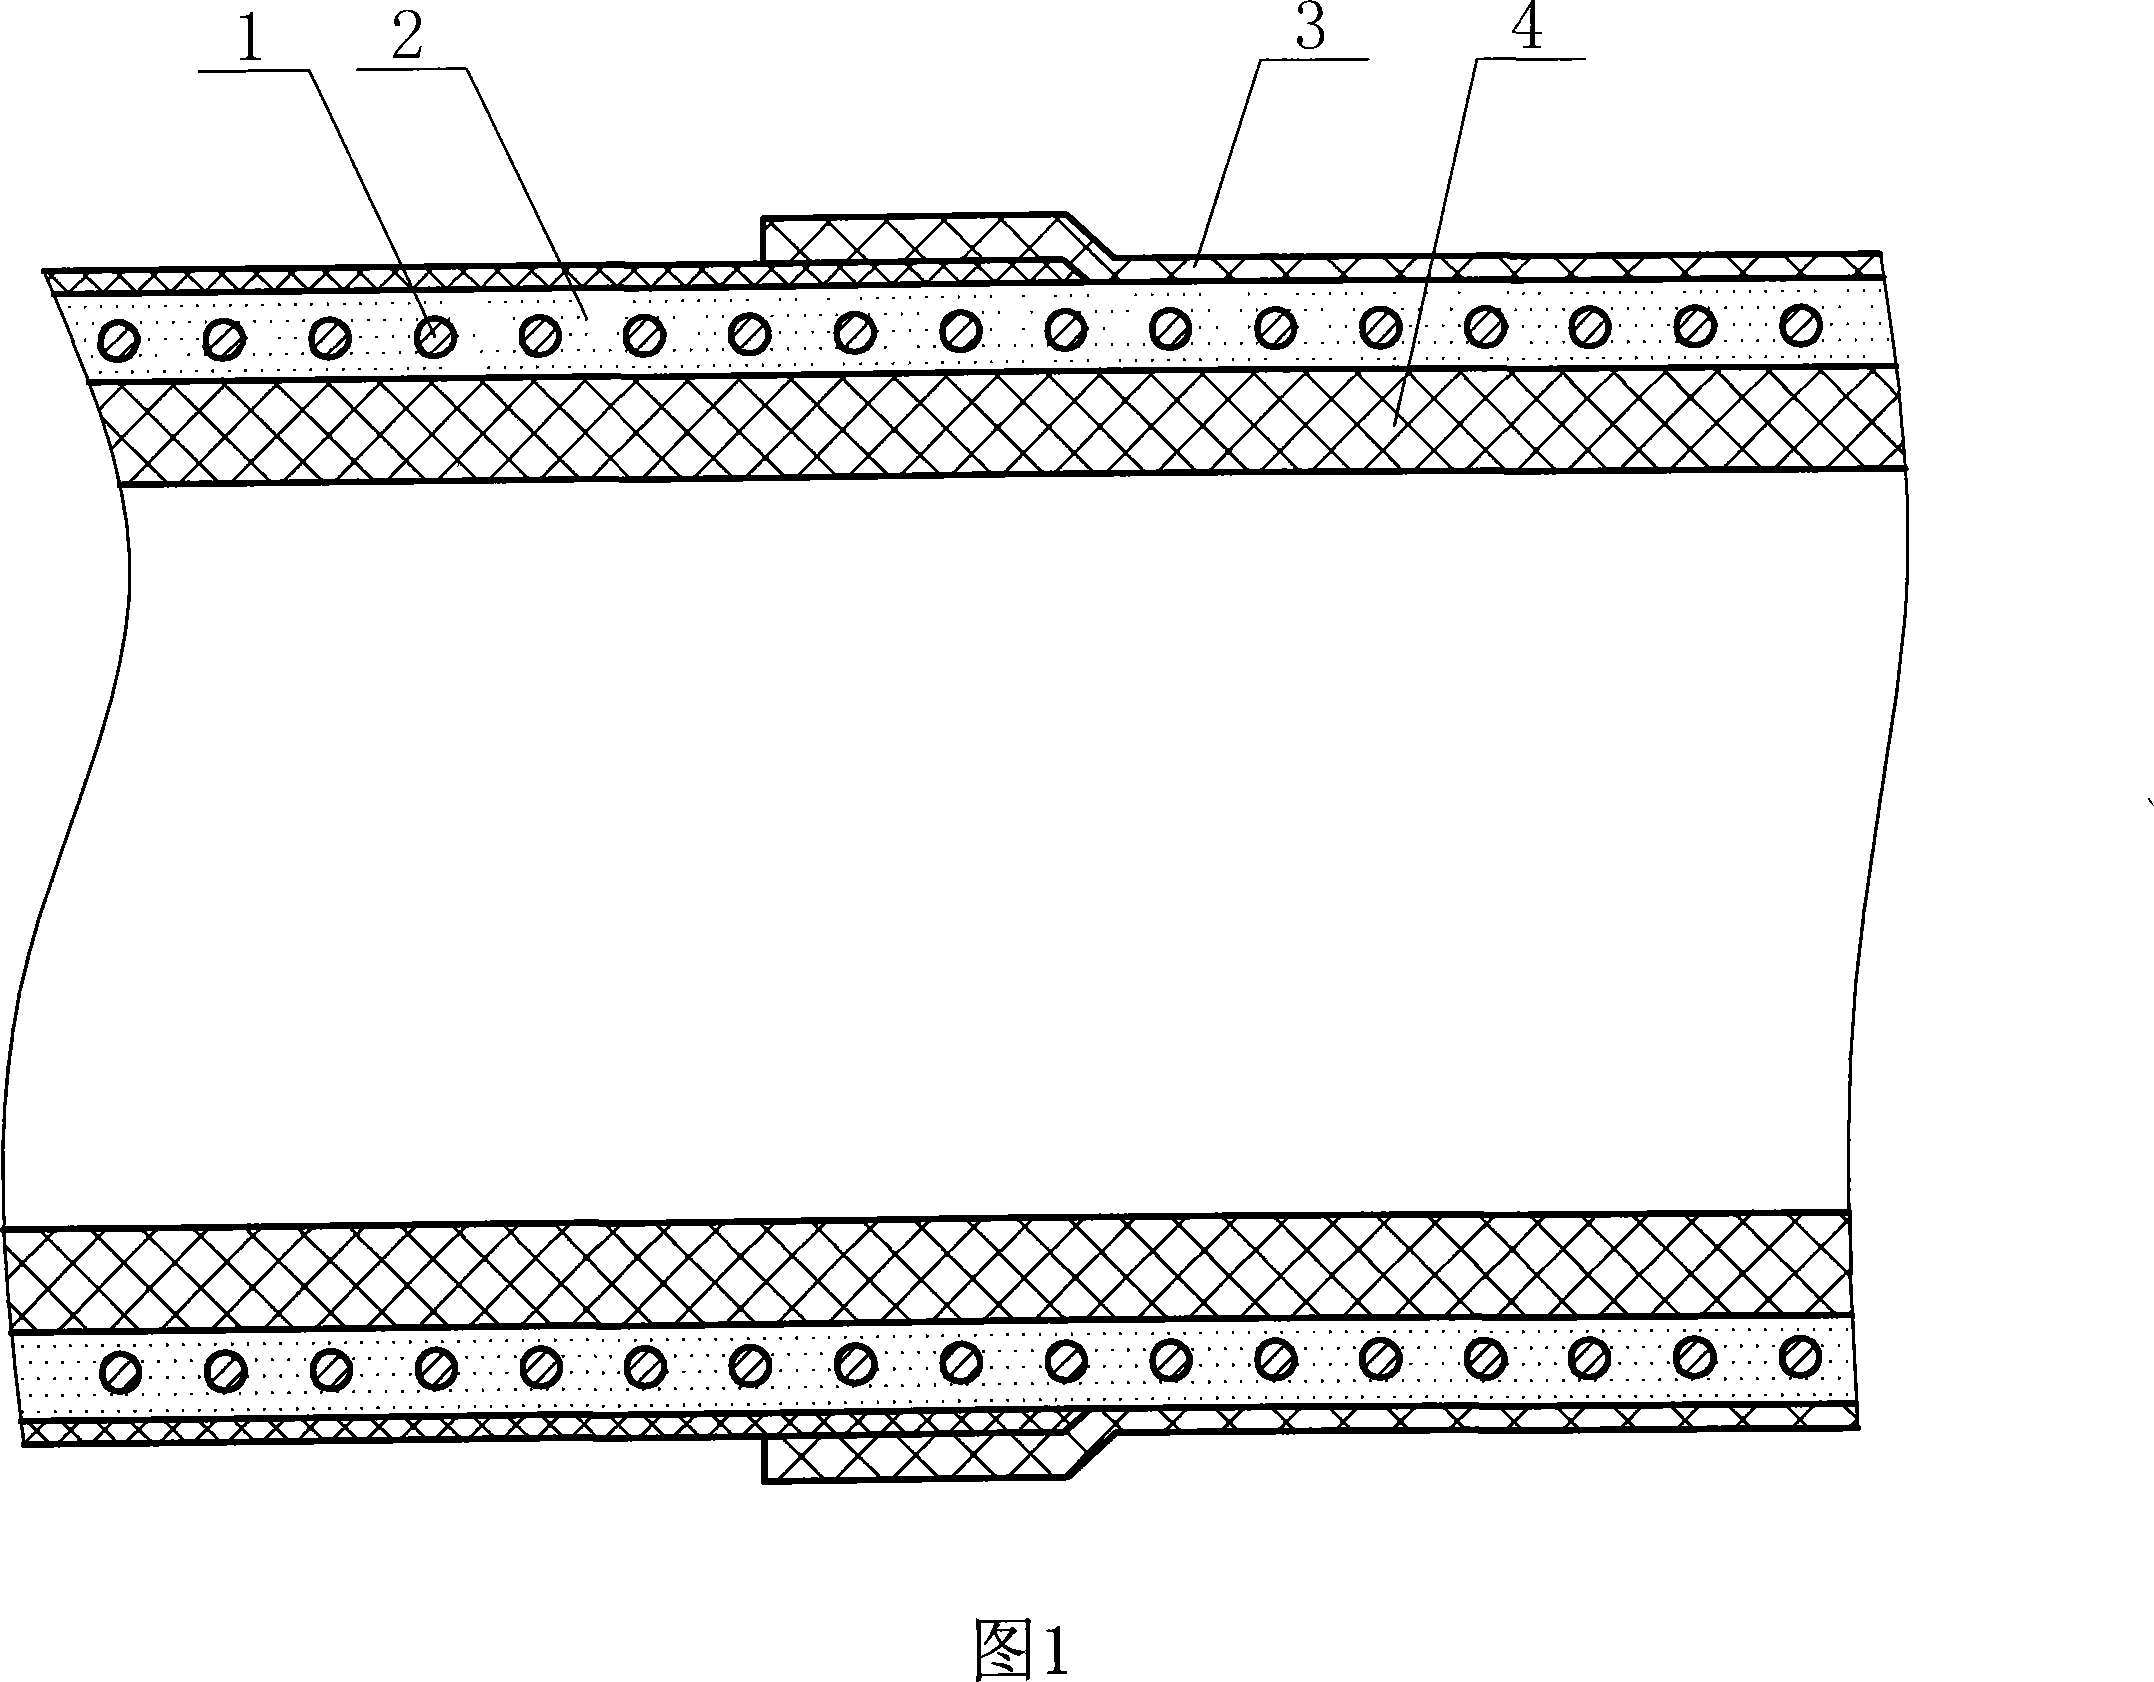 Ultrahigh molecular weight polyethylene dead-hard steel wire composite pipeline and manufacture method thereof